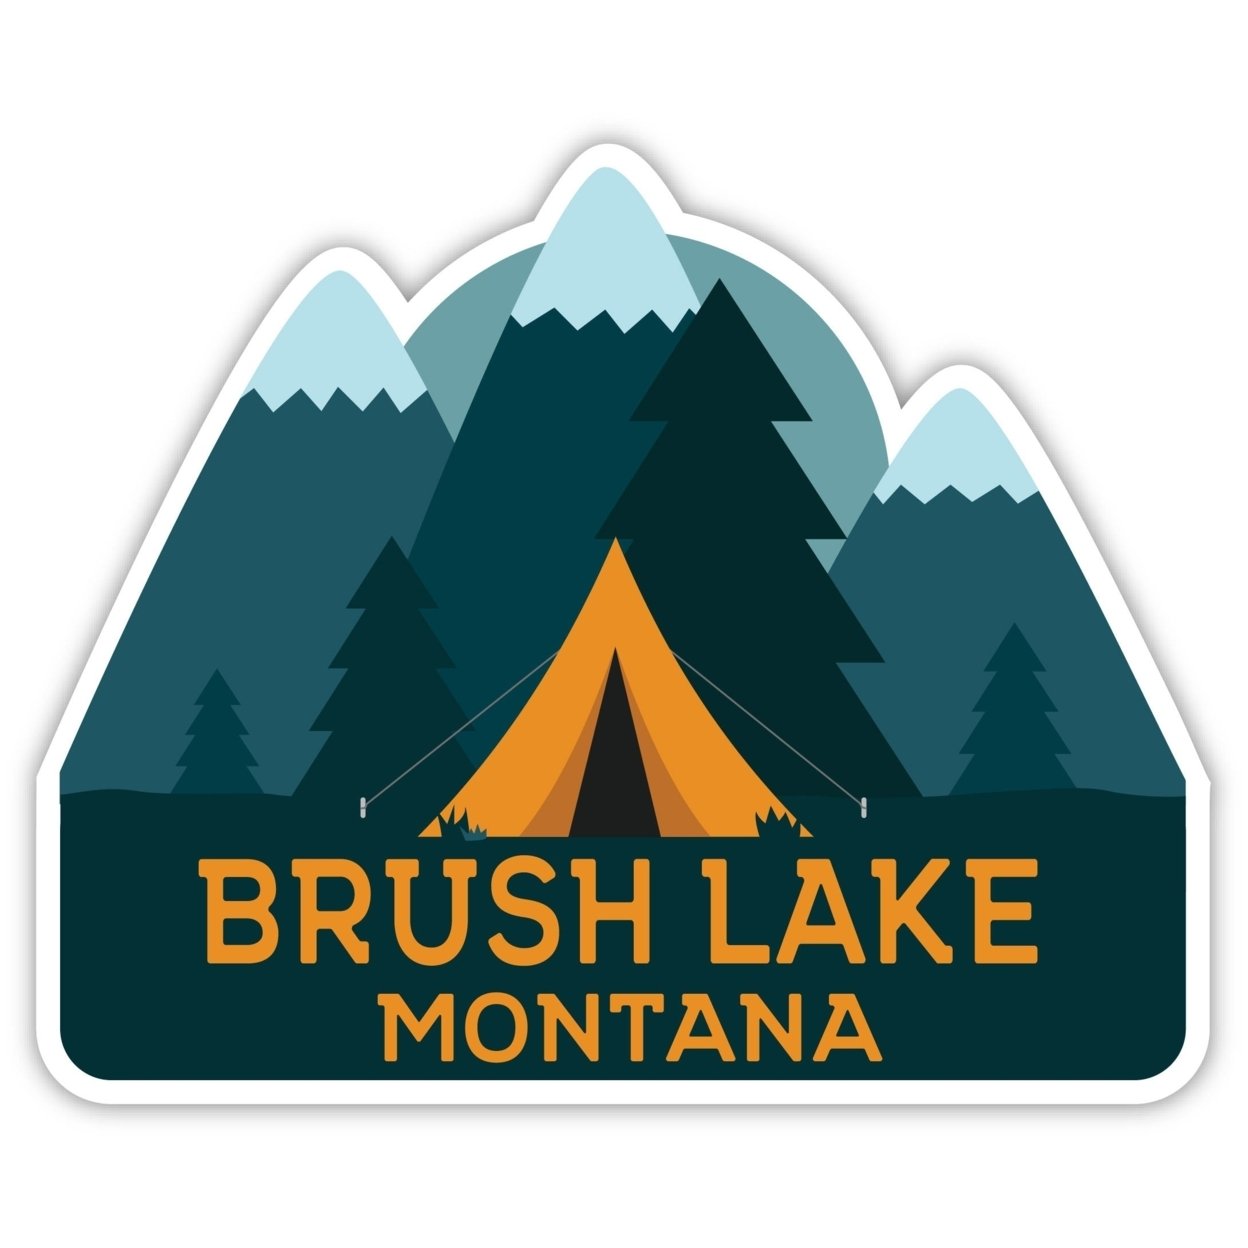 Brush Lake Montana Souvenir Decorative Stickers (Choose Theme And Size) - 4-Pack, 4-Inch, Tent